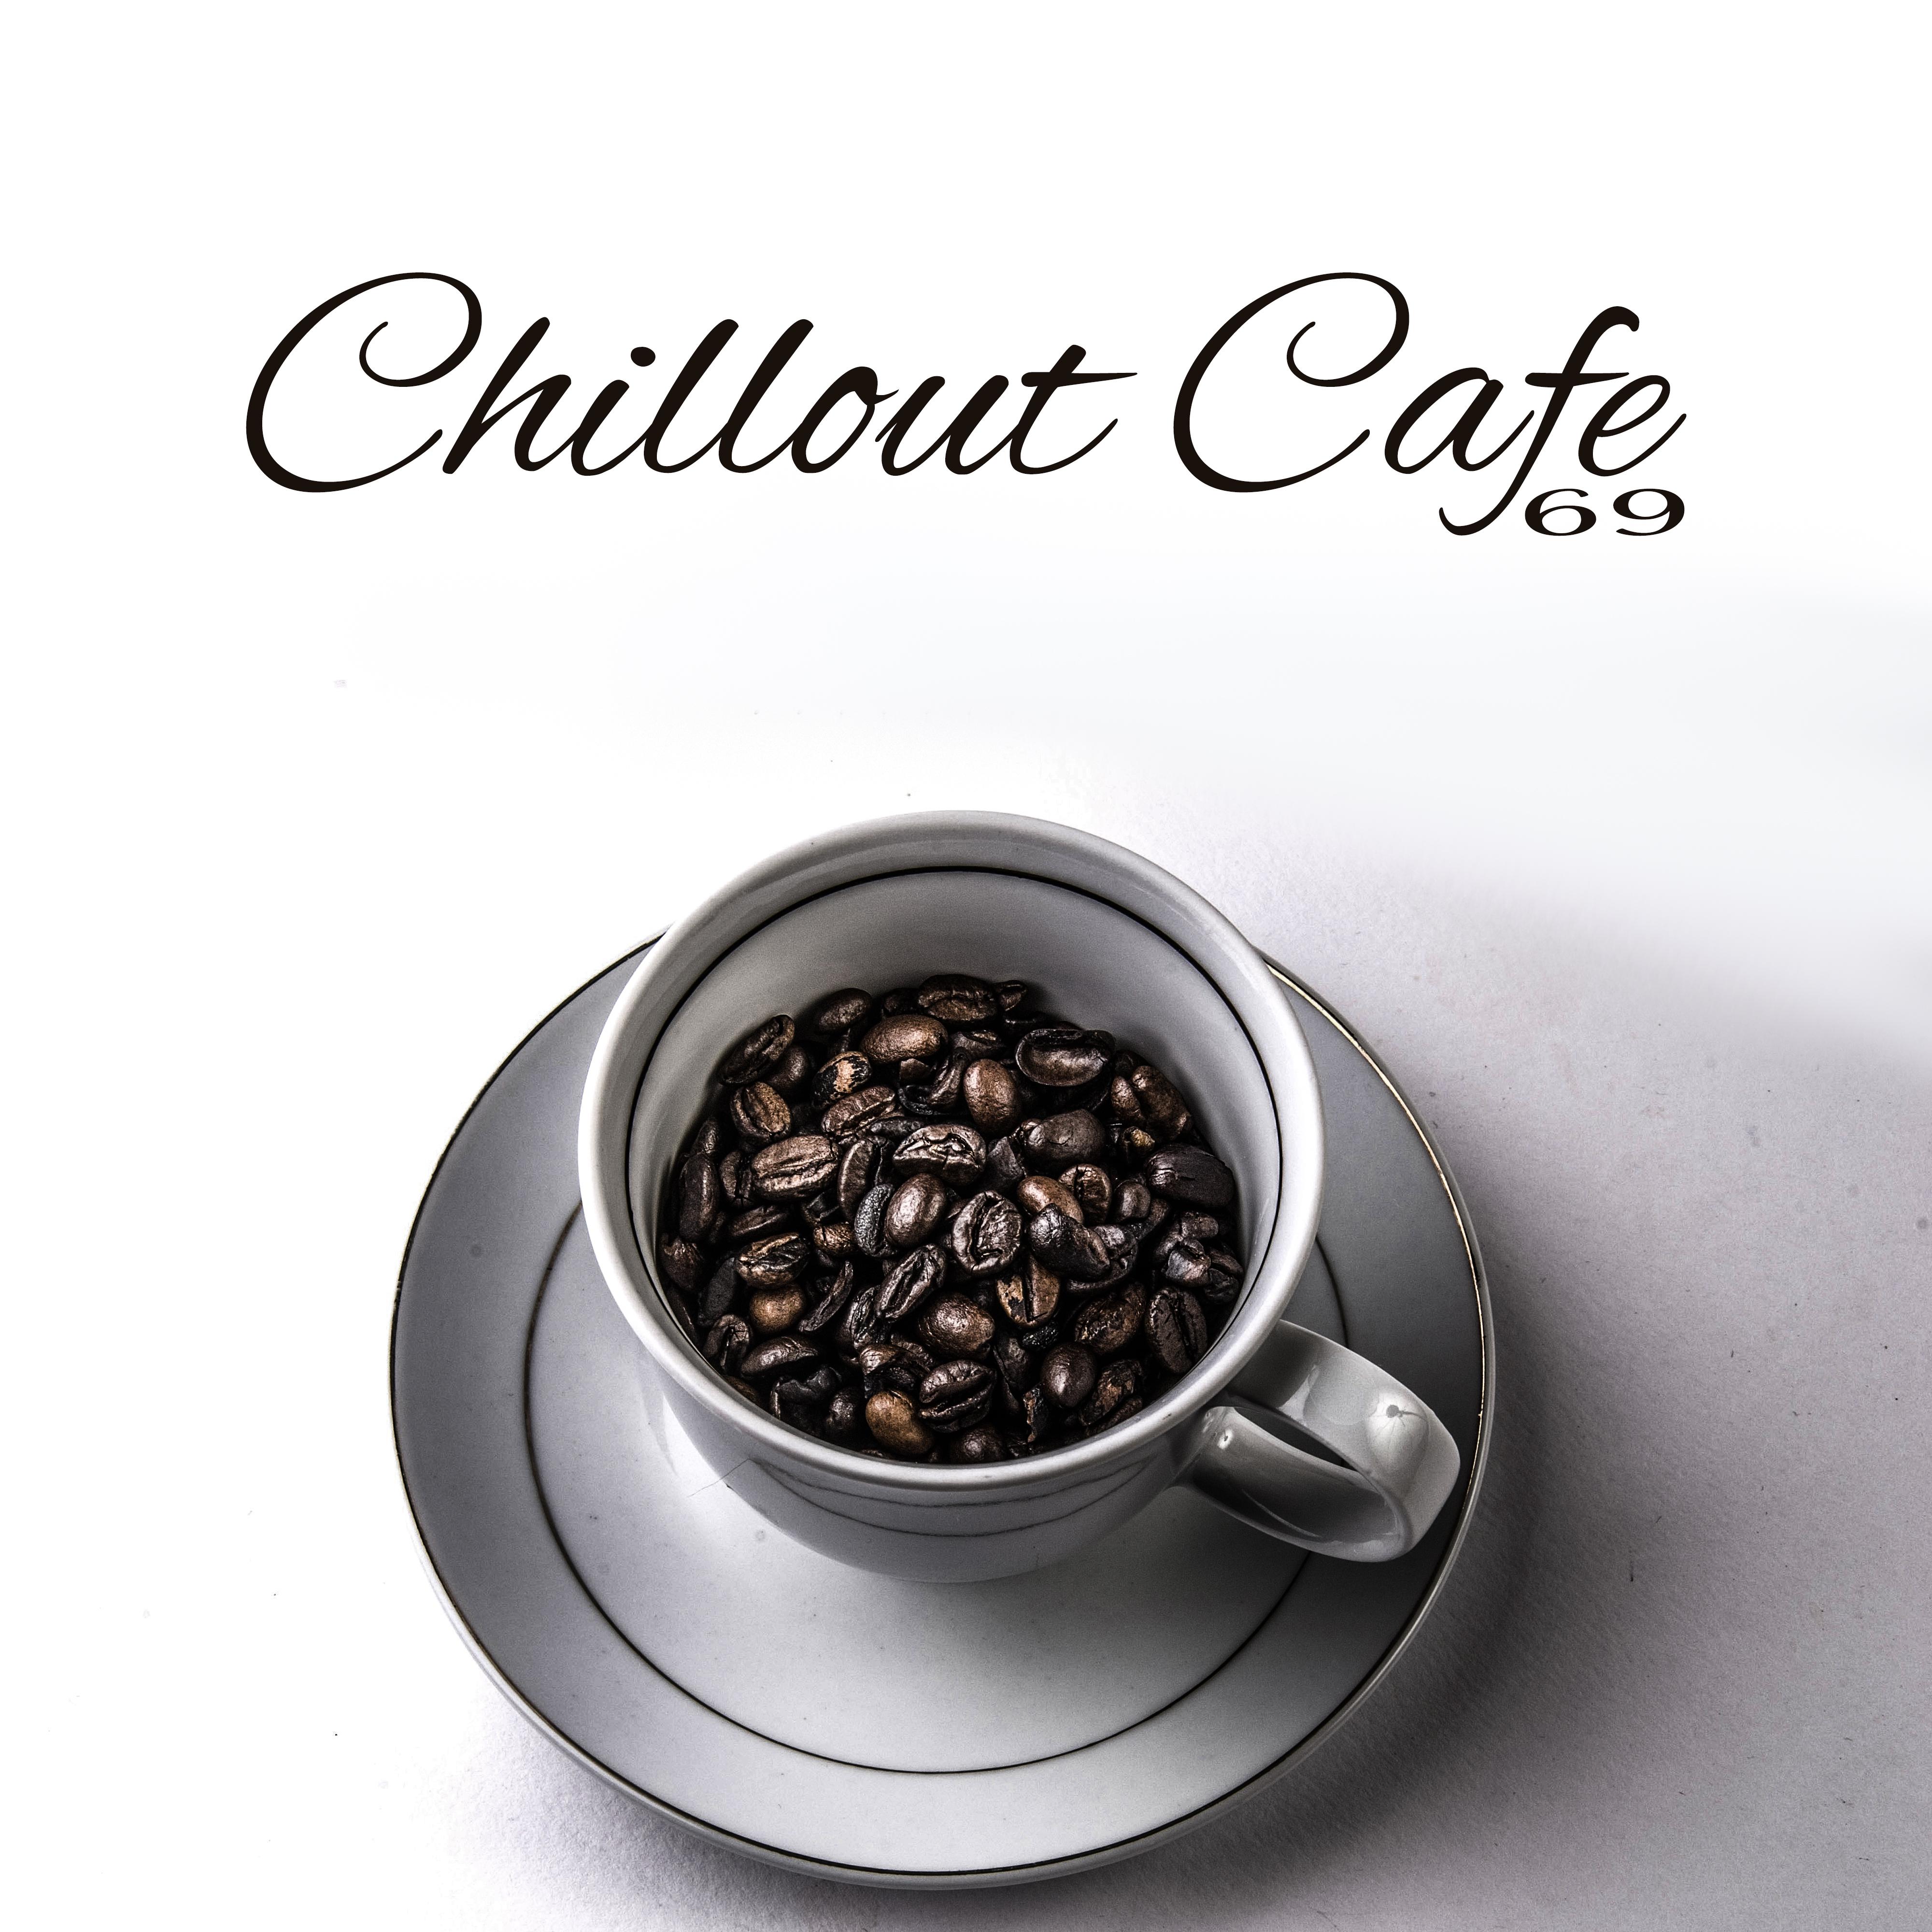 Chillout Cafe 69  - Essential Chill Out, Cafe Music, Lounge, Electronic Vibrations, Chill Out 2017